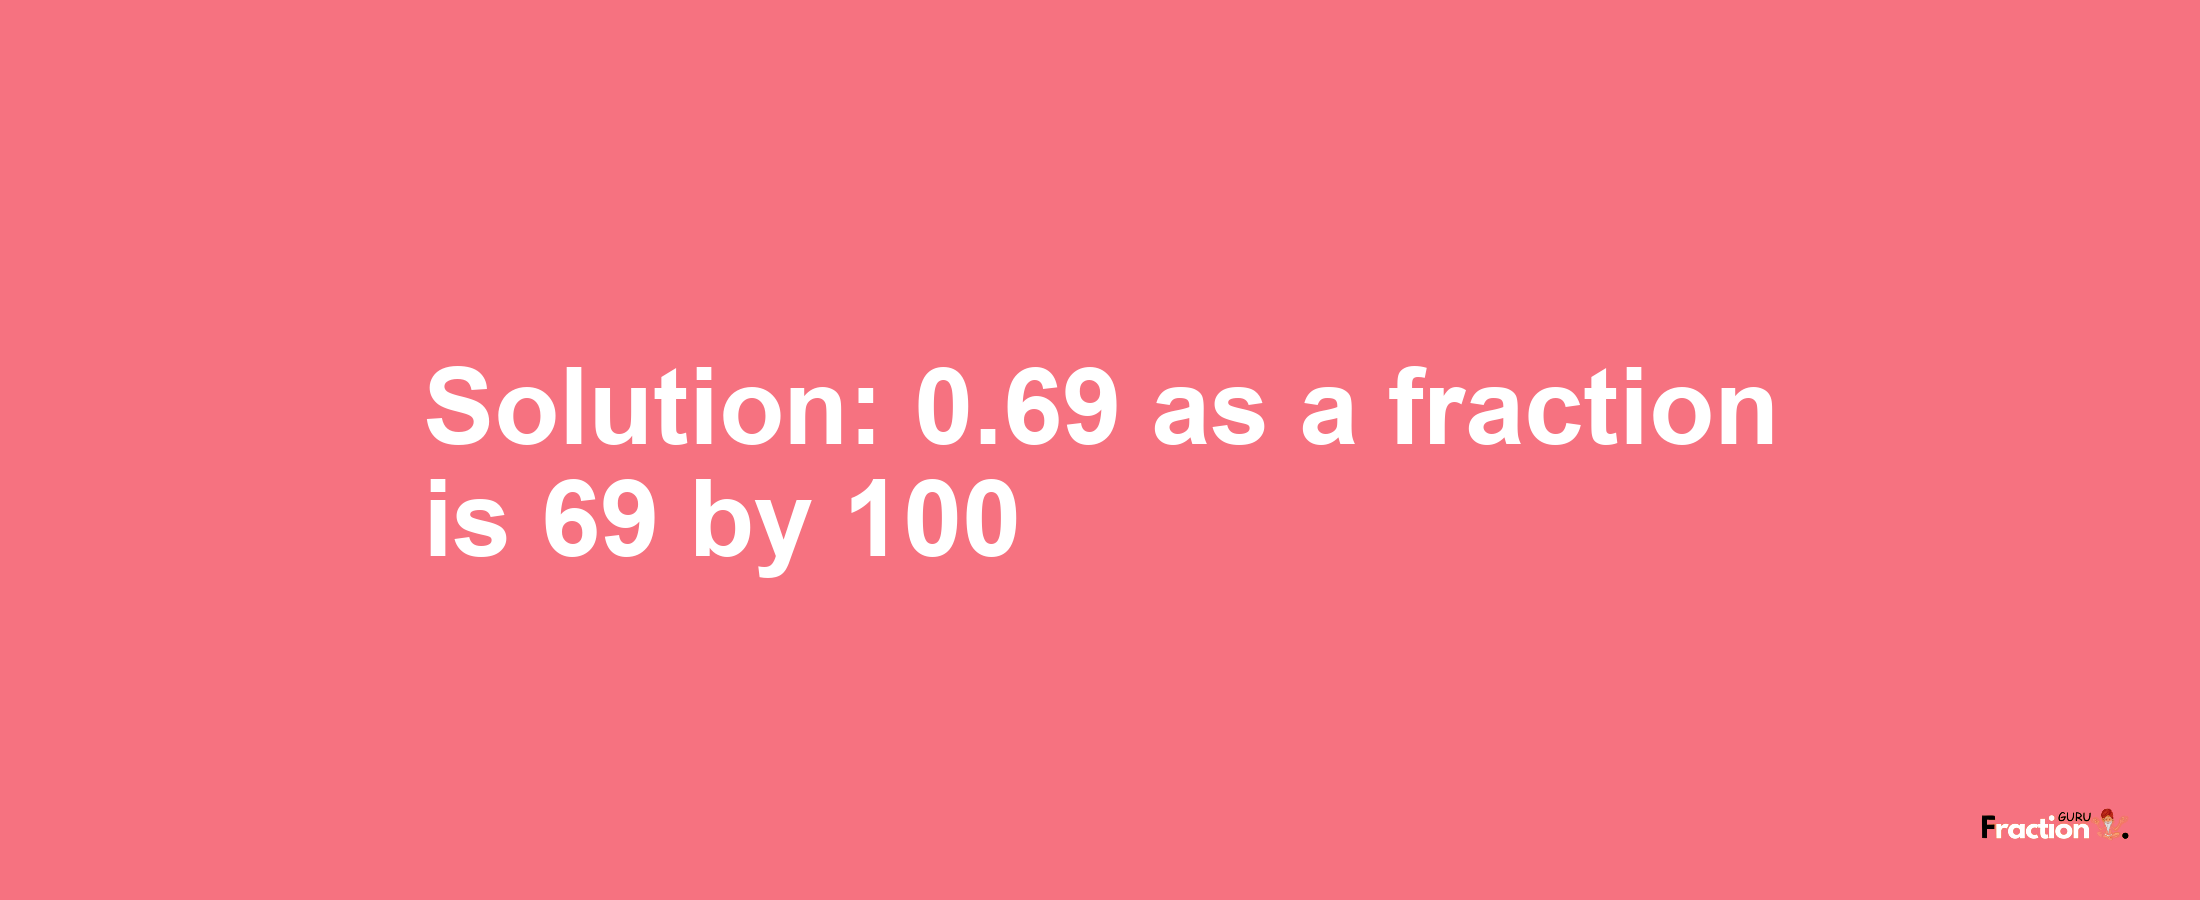 Solution:0.69 as a fraction is 69/100